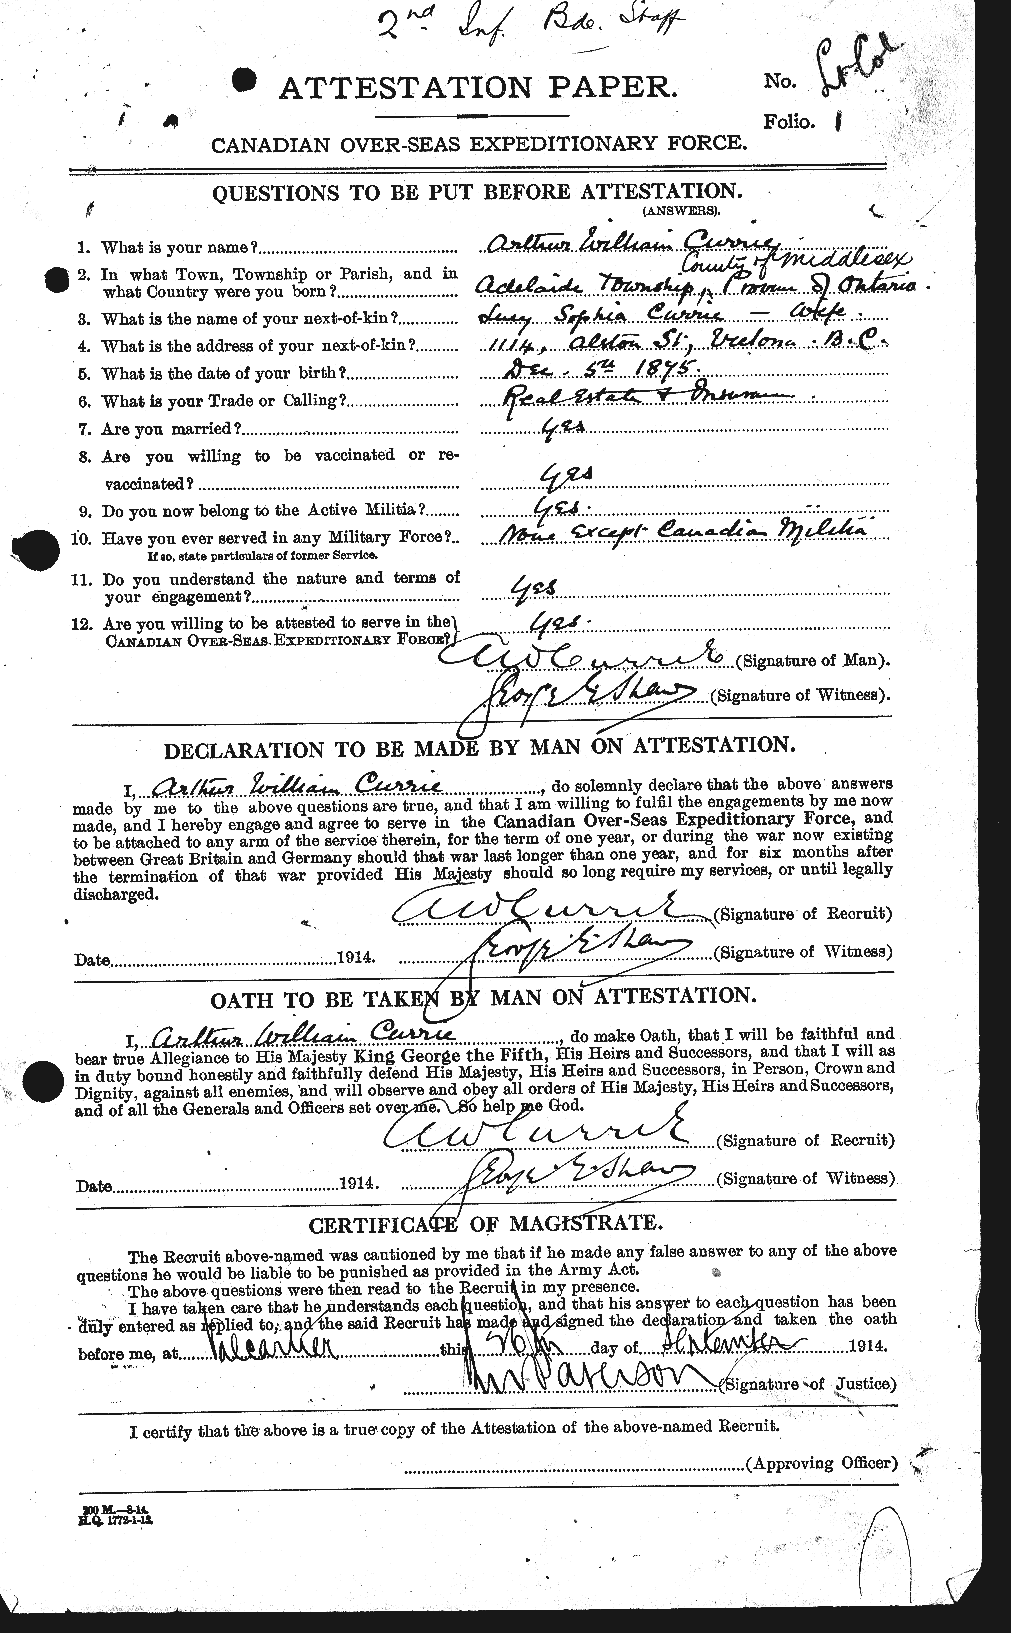 Personnel Records of the First World War - CEF 073228a